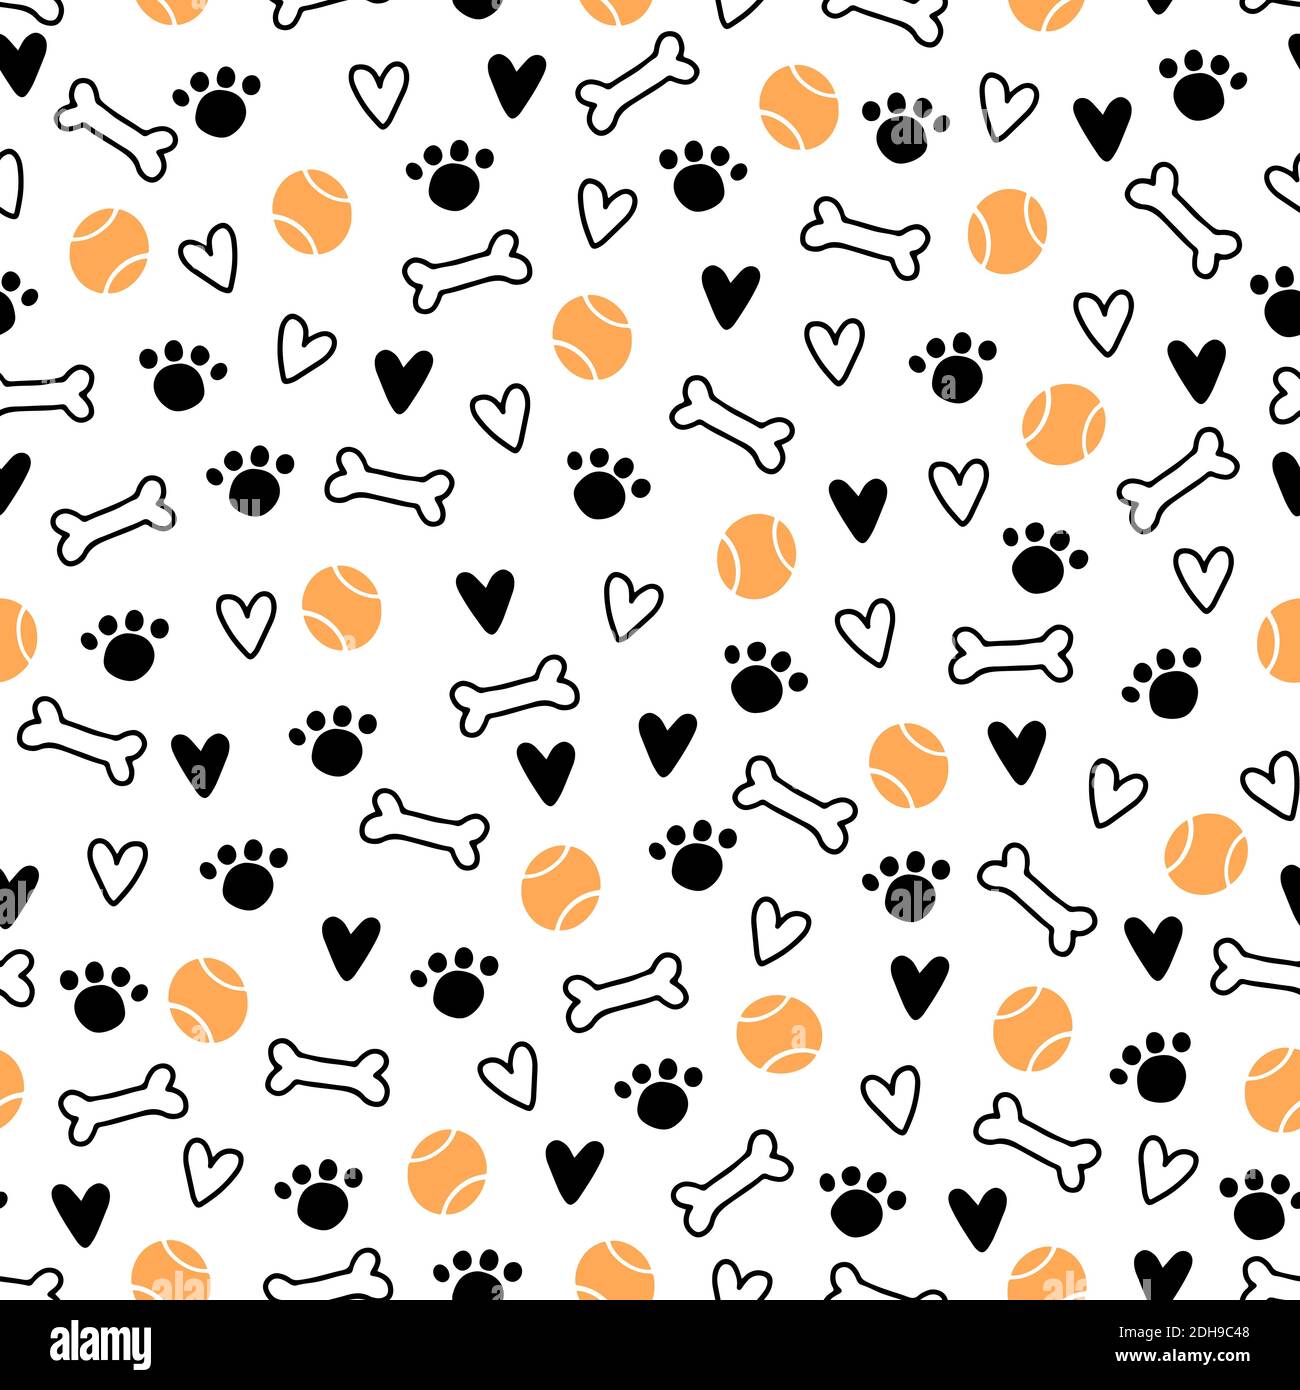 Dog Seamless Pattern French Bulldog Vector Pet Puppy Scarf Isolated Tile  Background Repeat Wallpaper Cartoon Illustration Stock Vector   Illustration of graphic bulldog 143858920